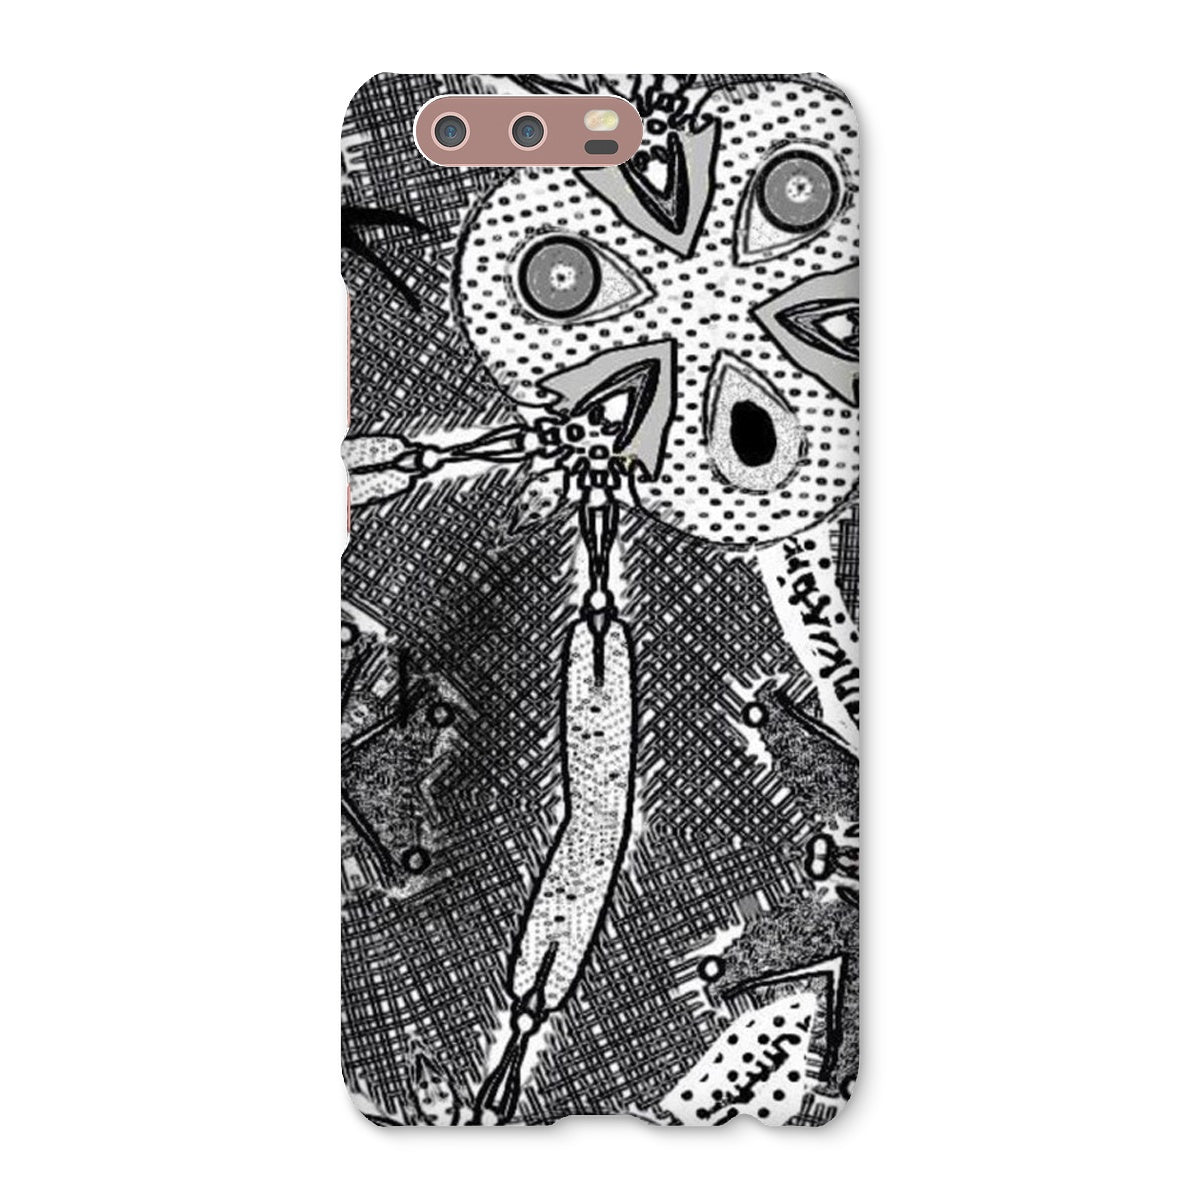 Snakes Snap Phone Case